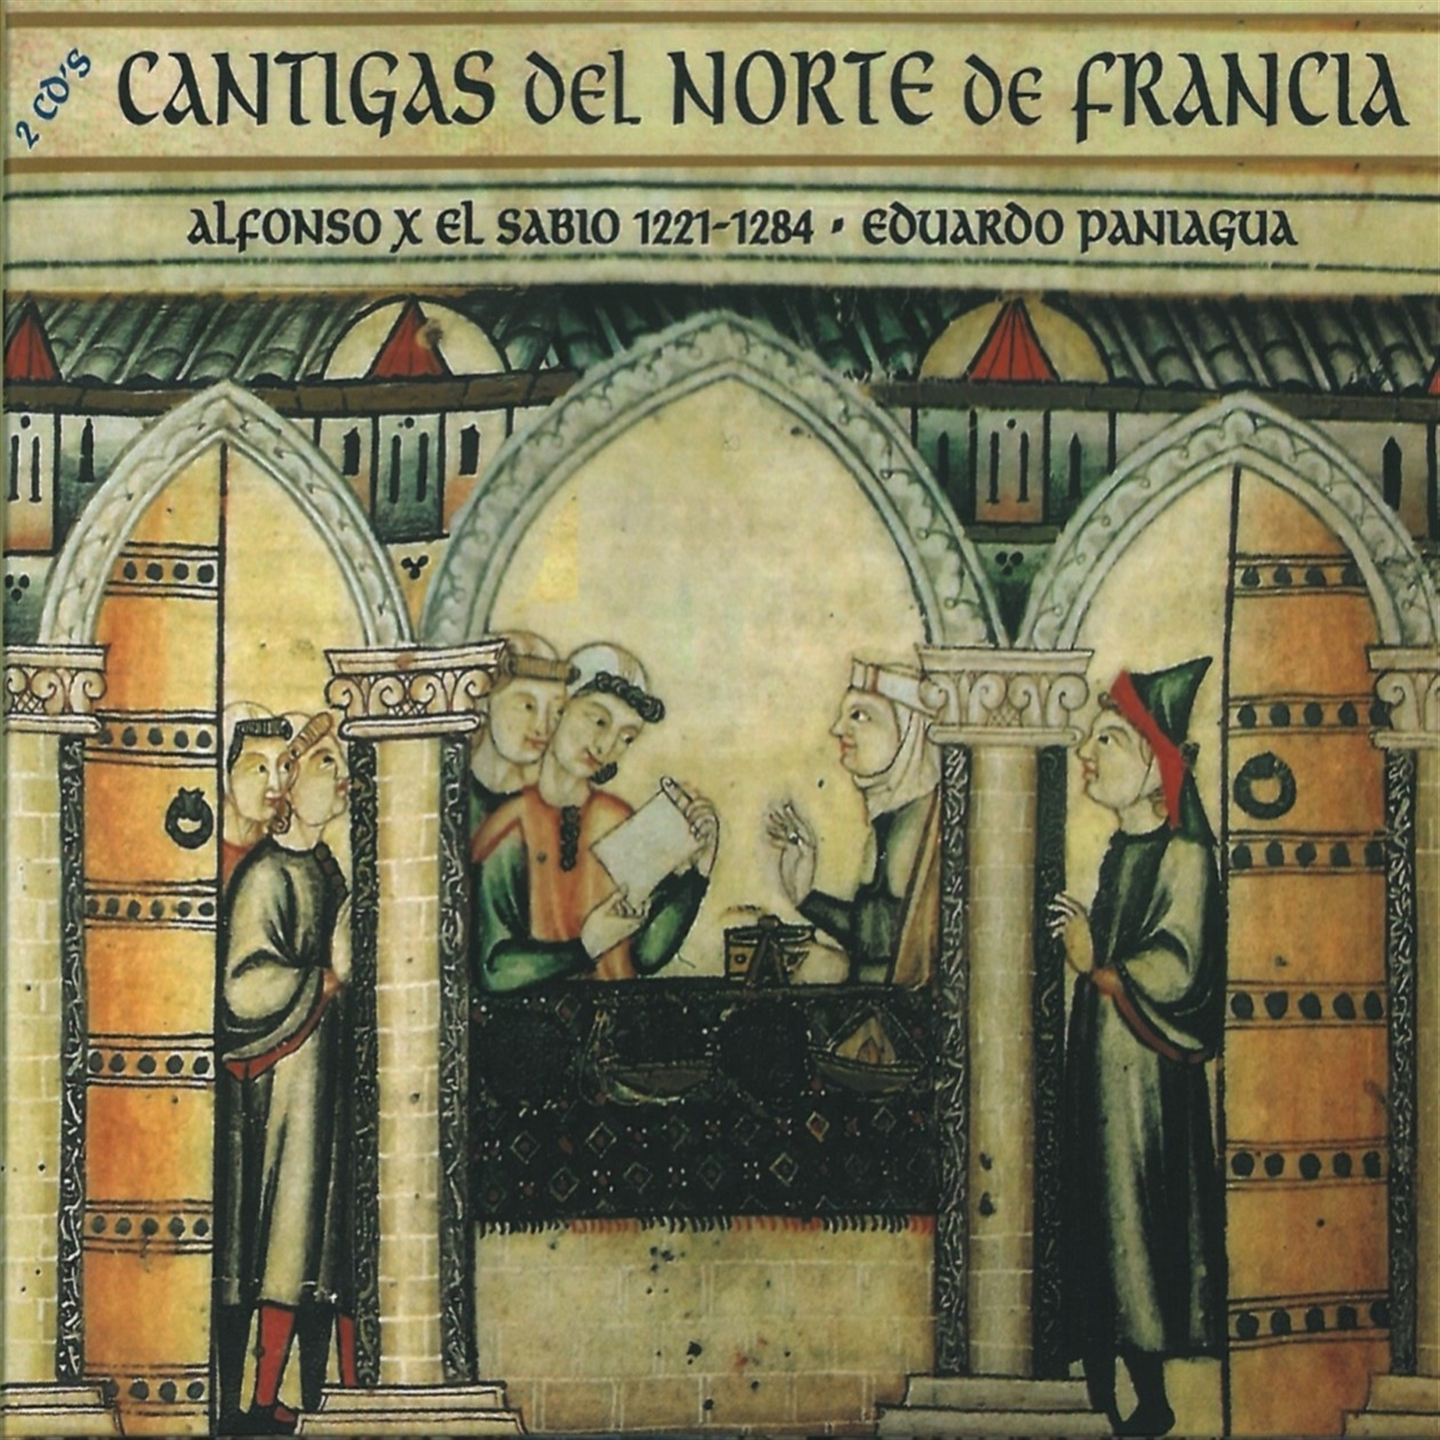 CANTIGAS OF NORTHERN FRANCE